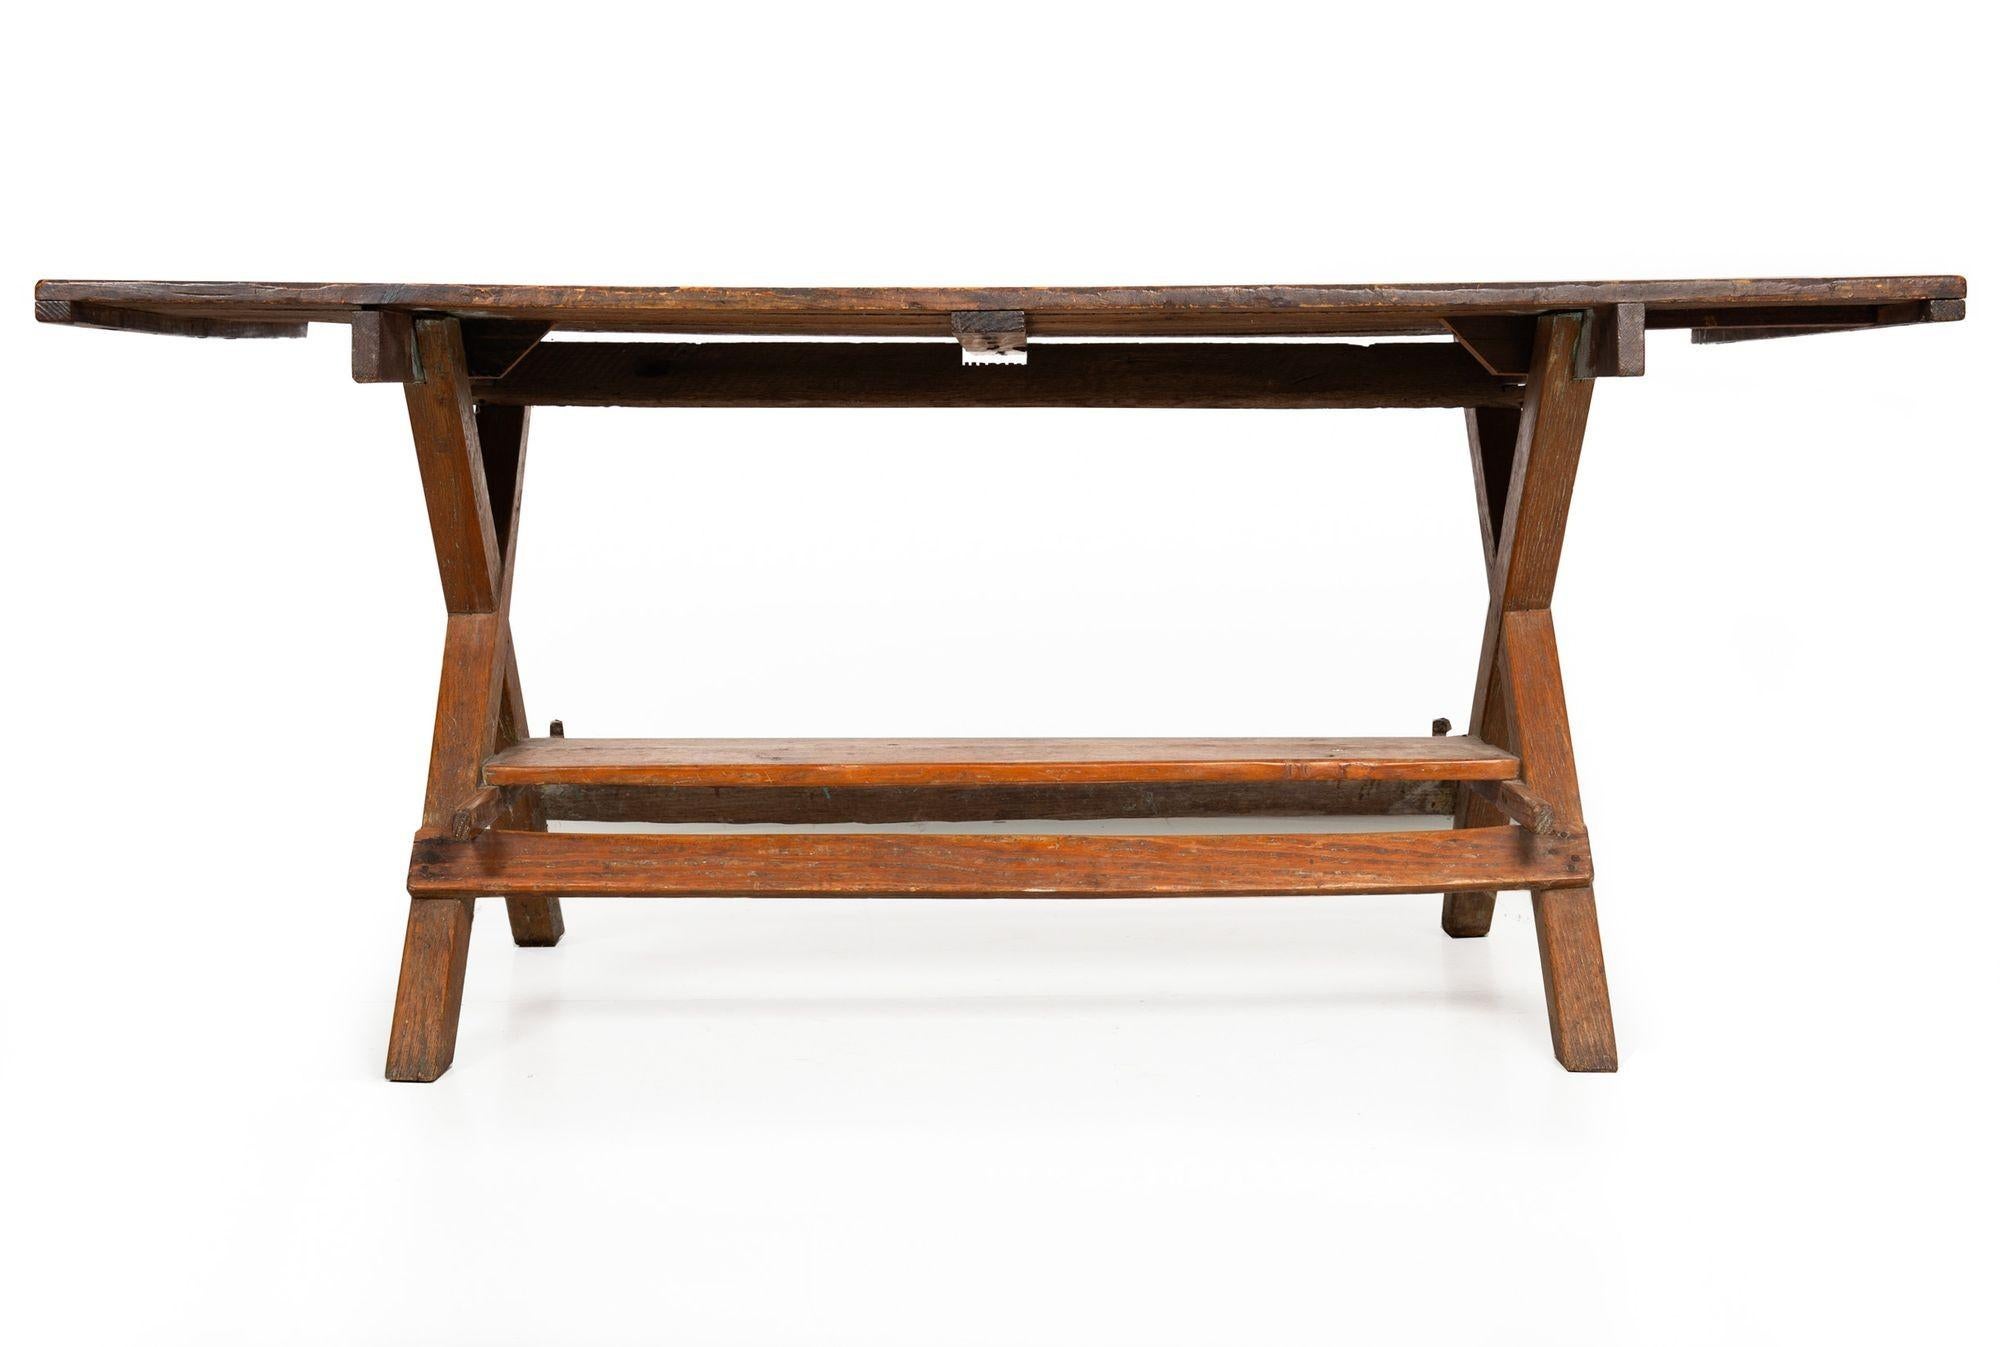 Rustic Beautifully Patinated 19th Century American Harvest Farm Table